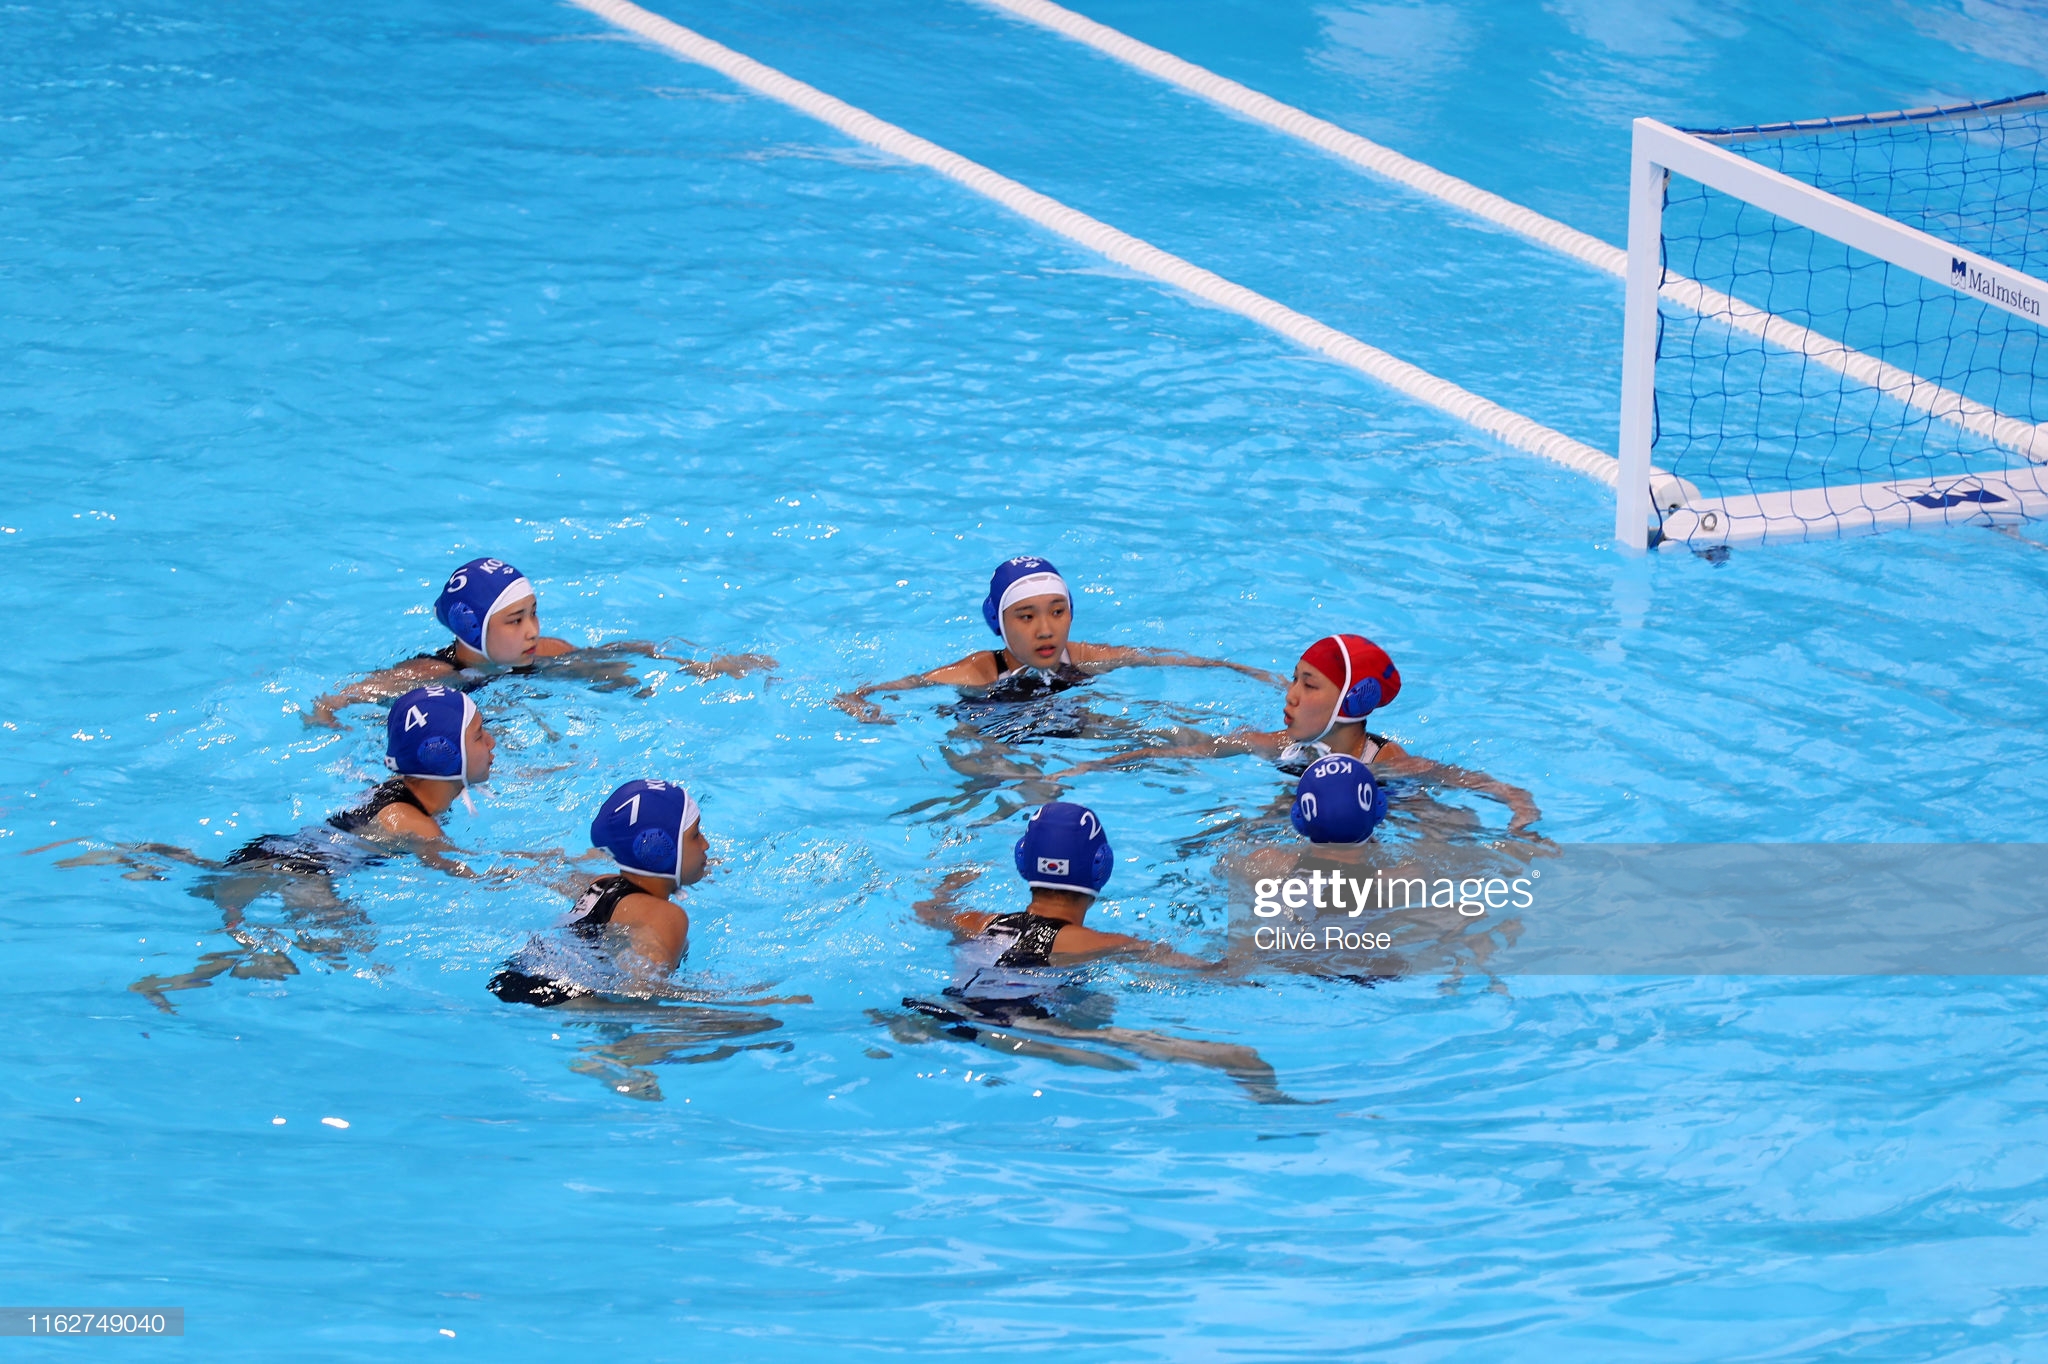 gettyimages-1162749040-2048x2048.jpg